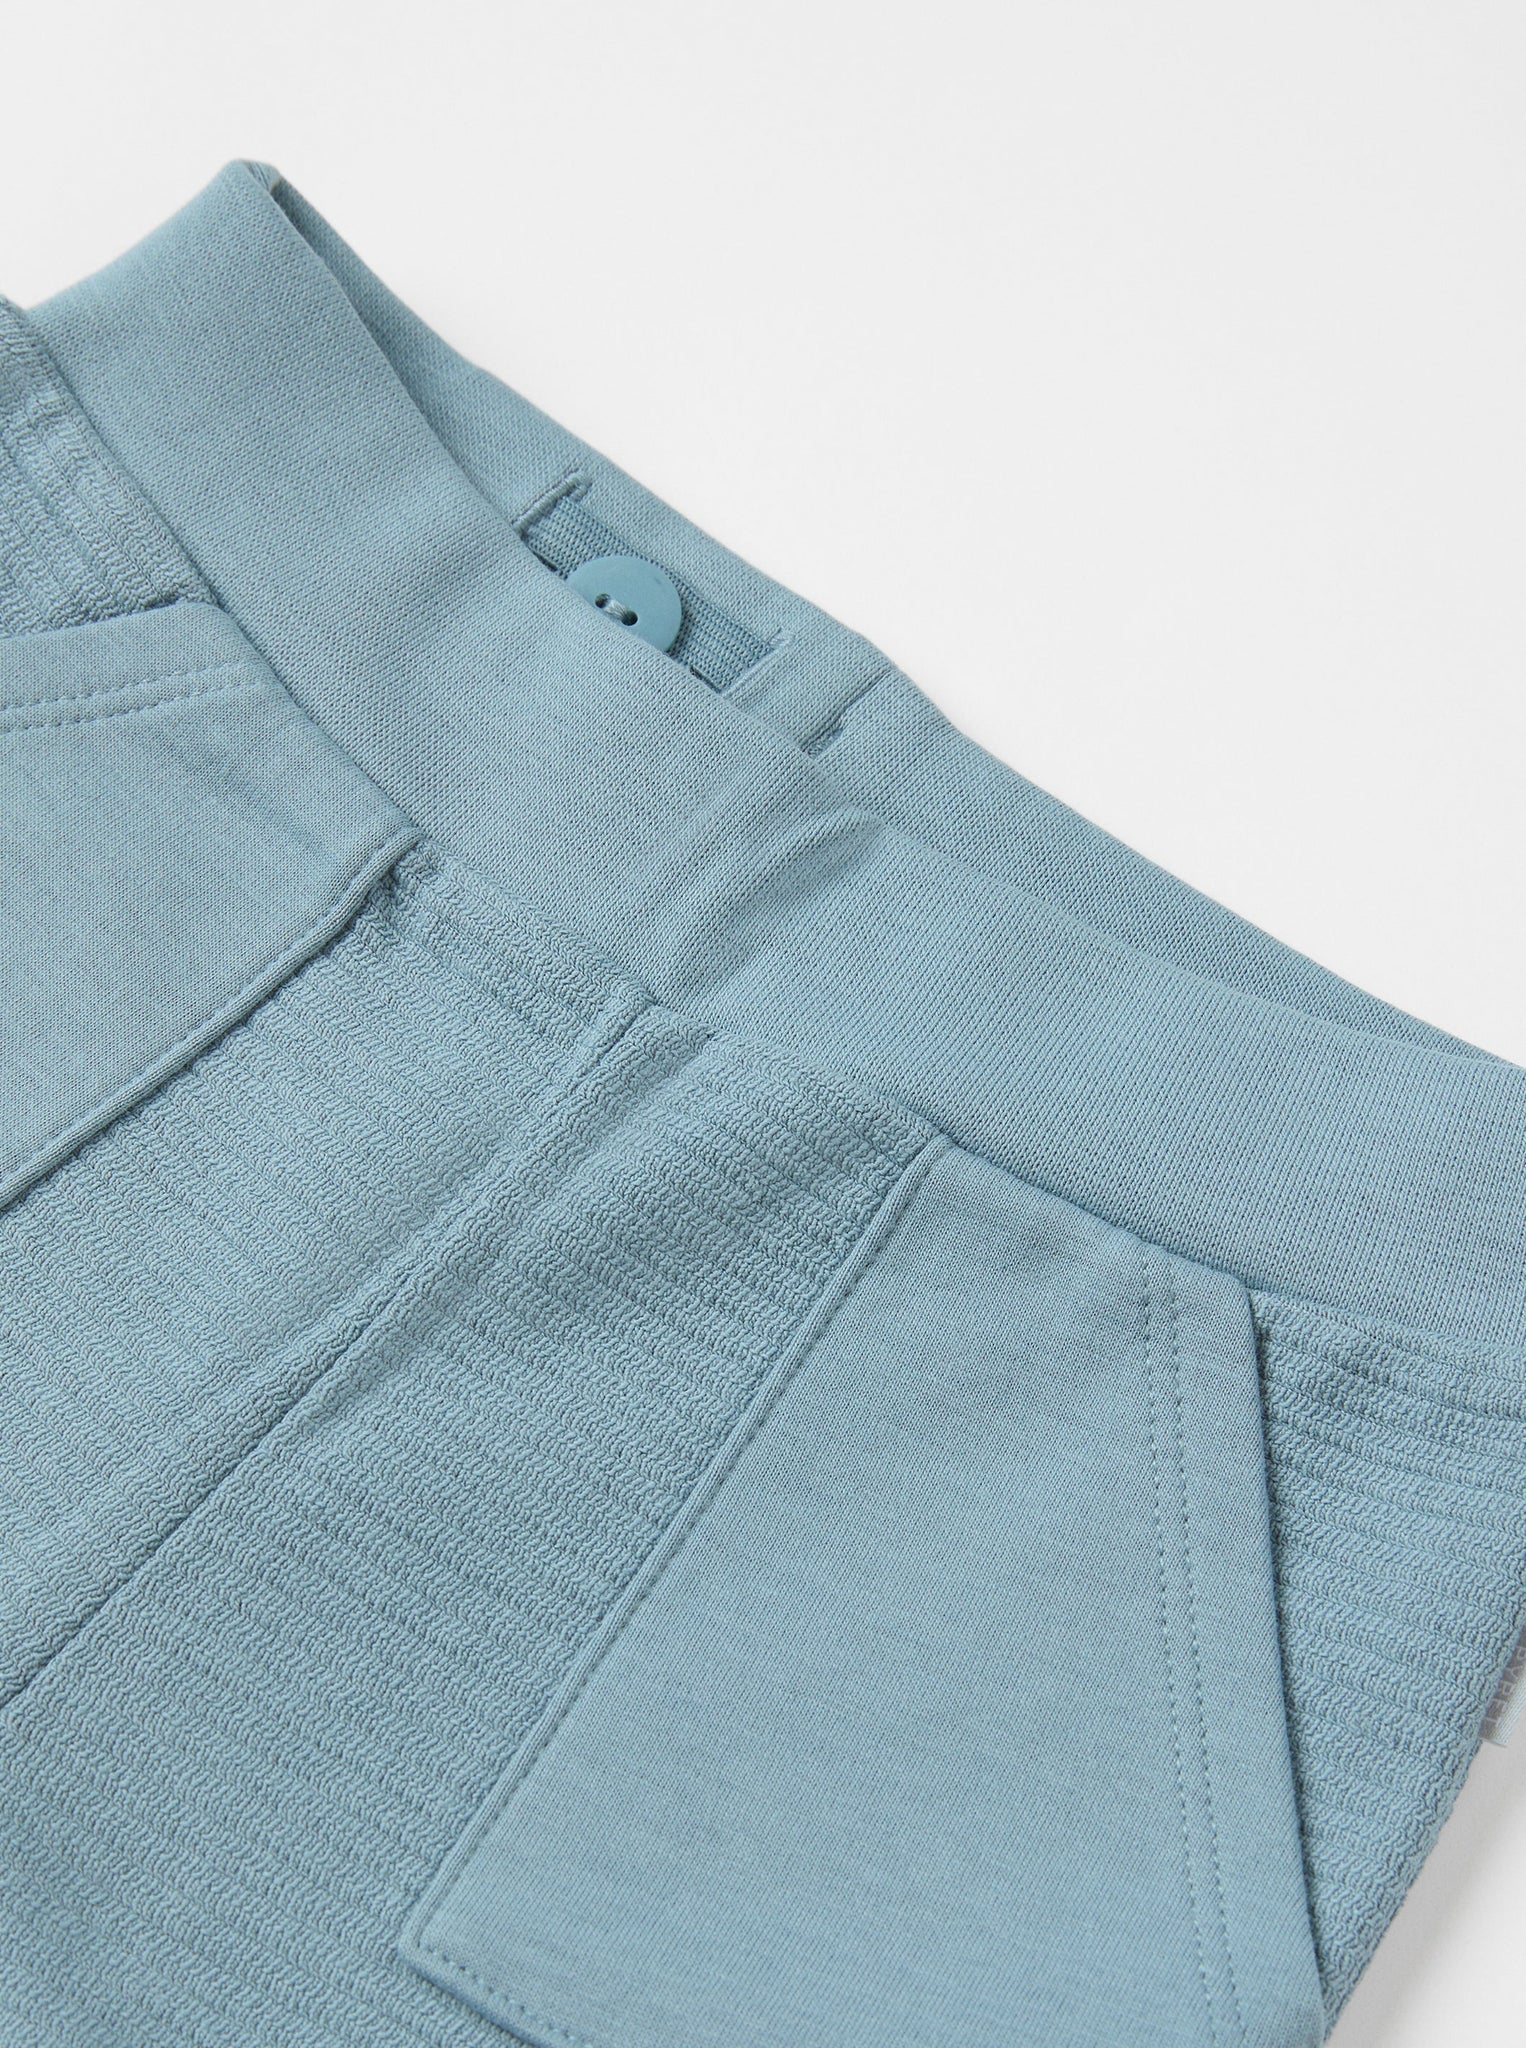 Organic Cotton Blue Baby Leggings from the Polarn O. Pyret babywear collection. Clothes made using sustainably sourced materials.